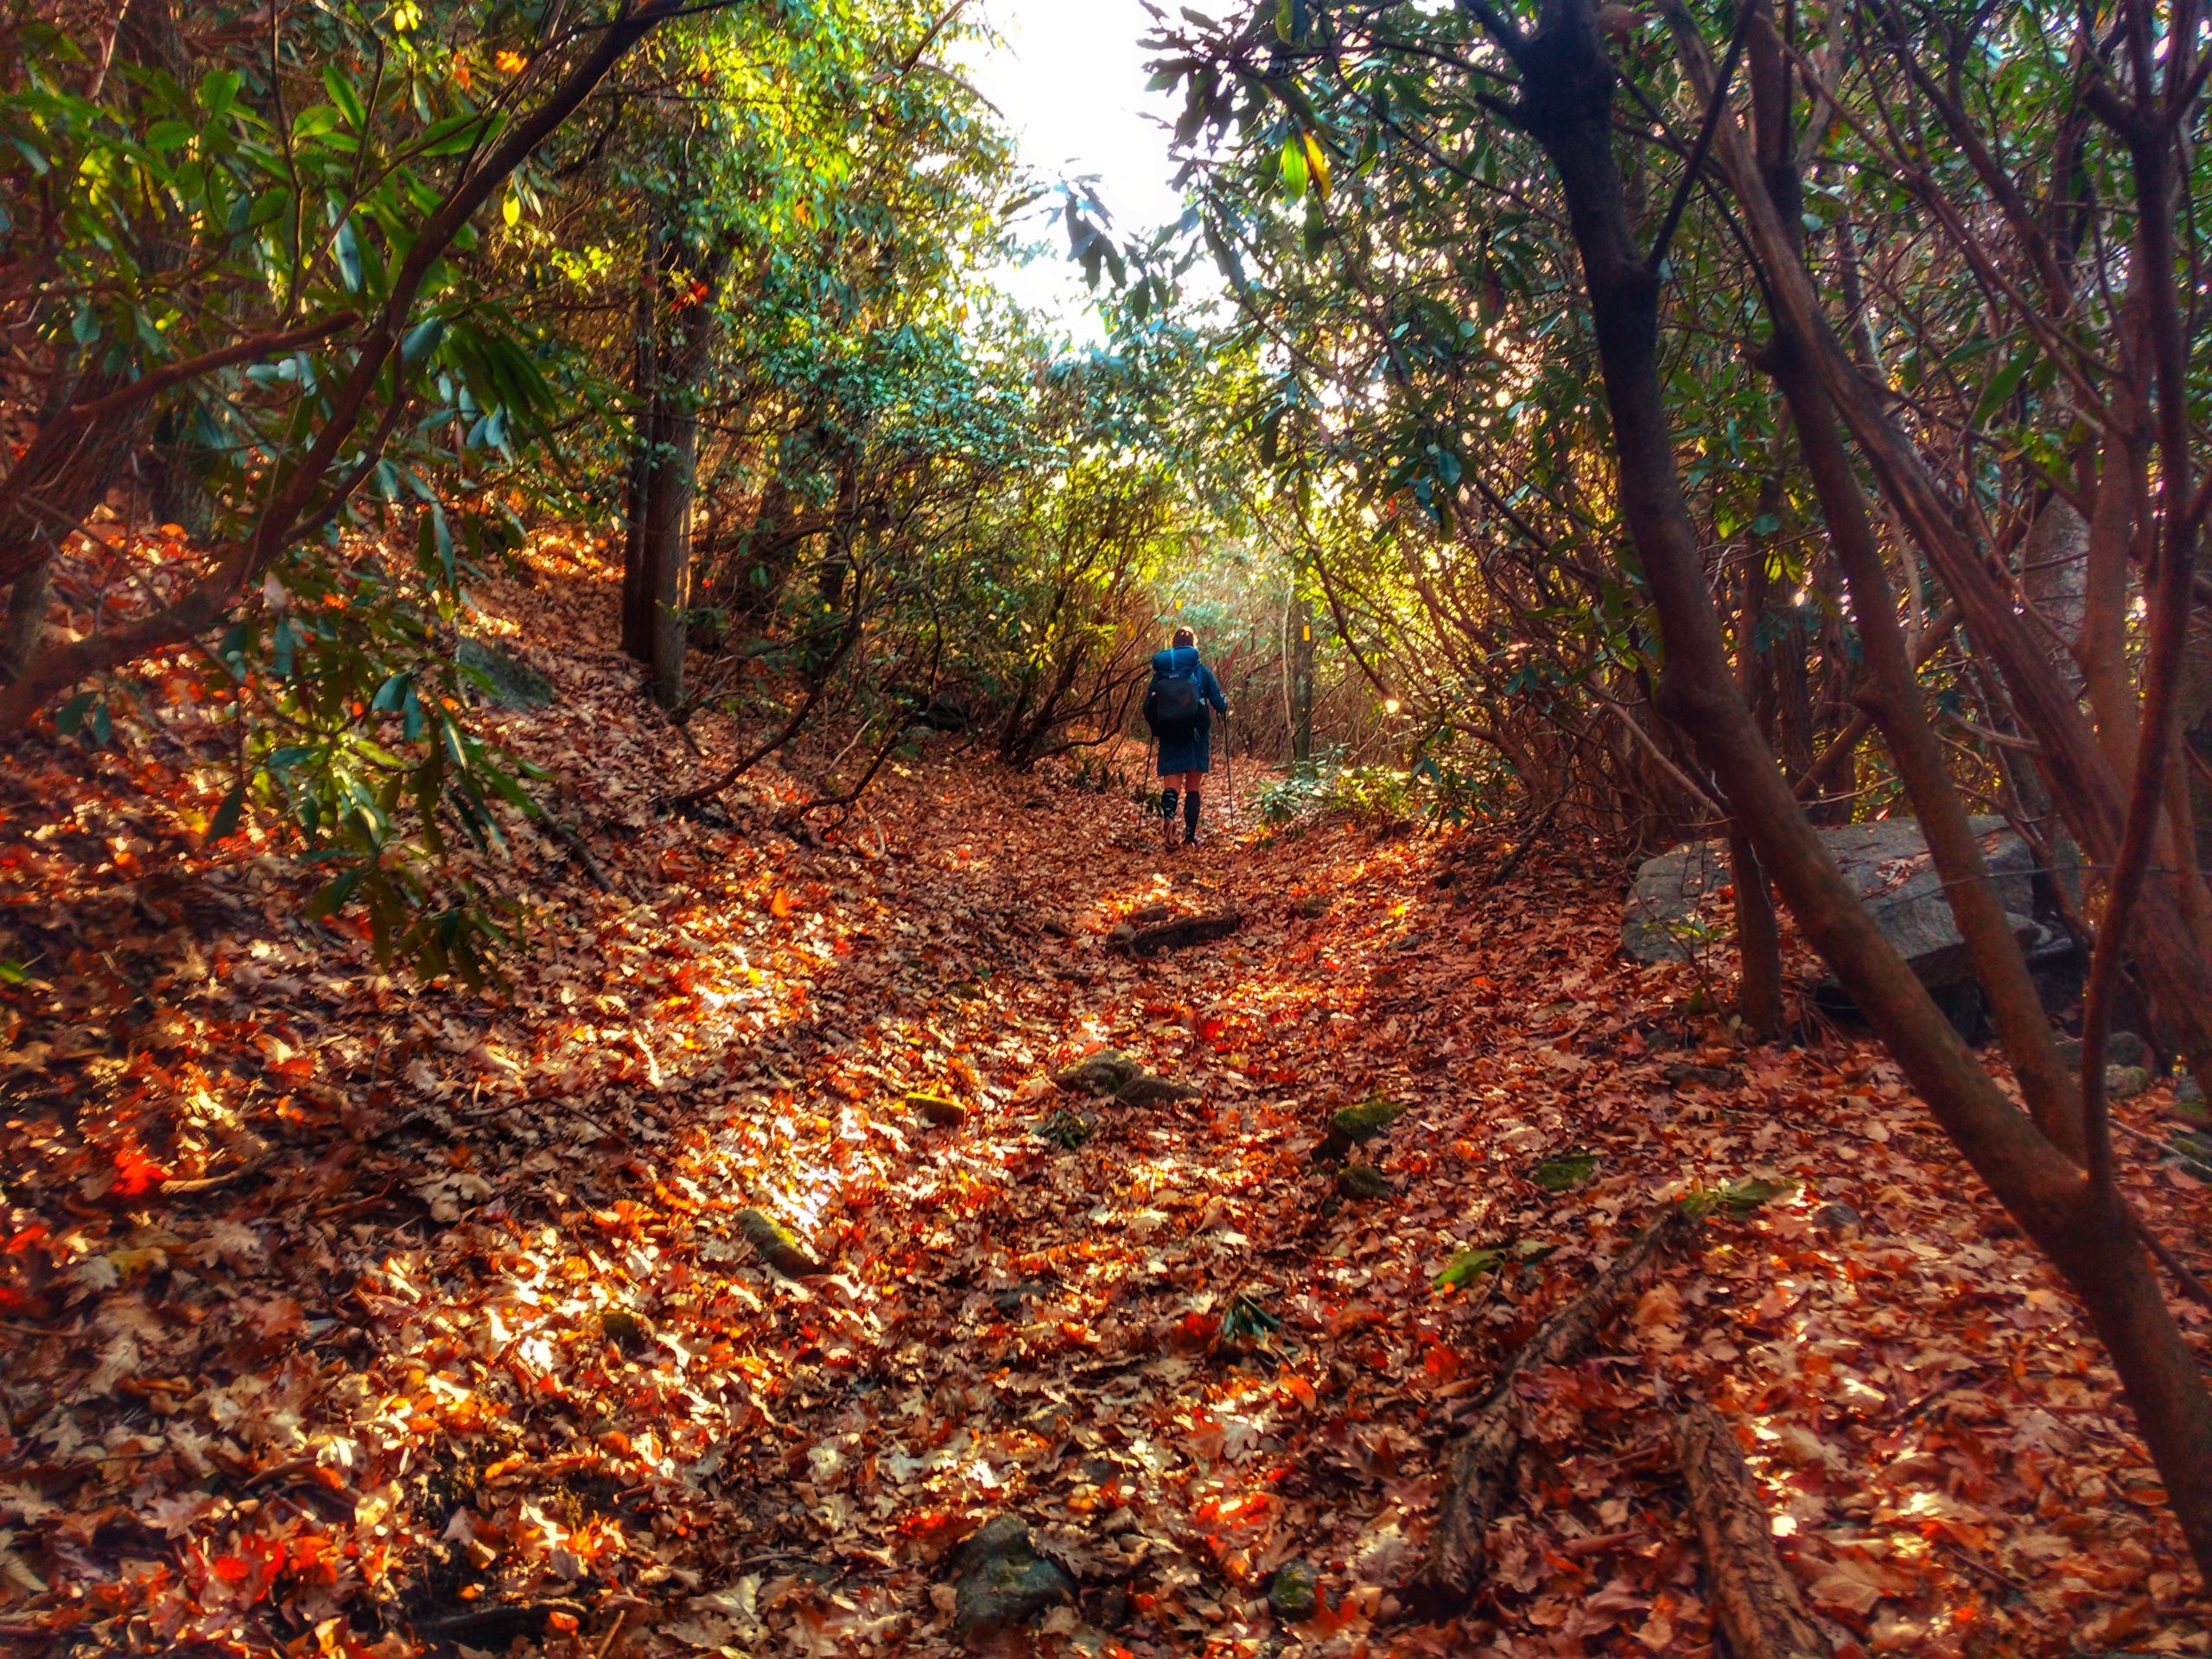 Heather Anderson hiking in through a leaf covered forest.